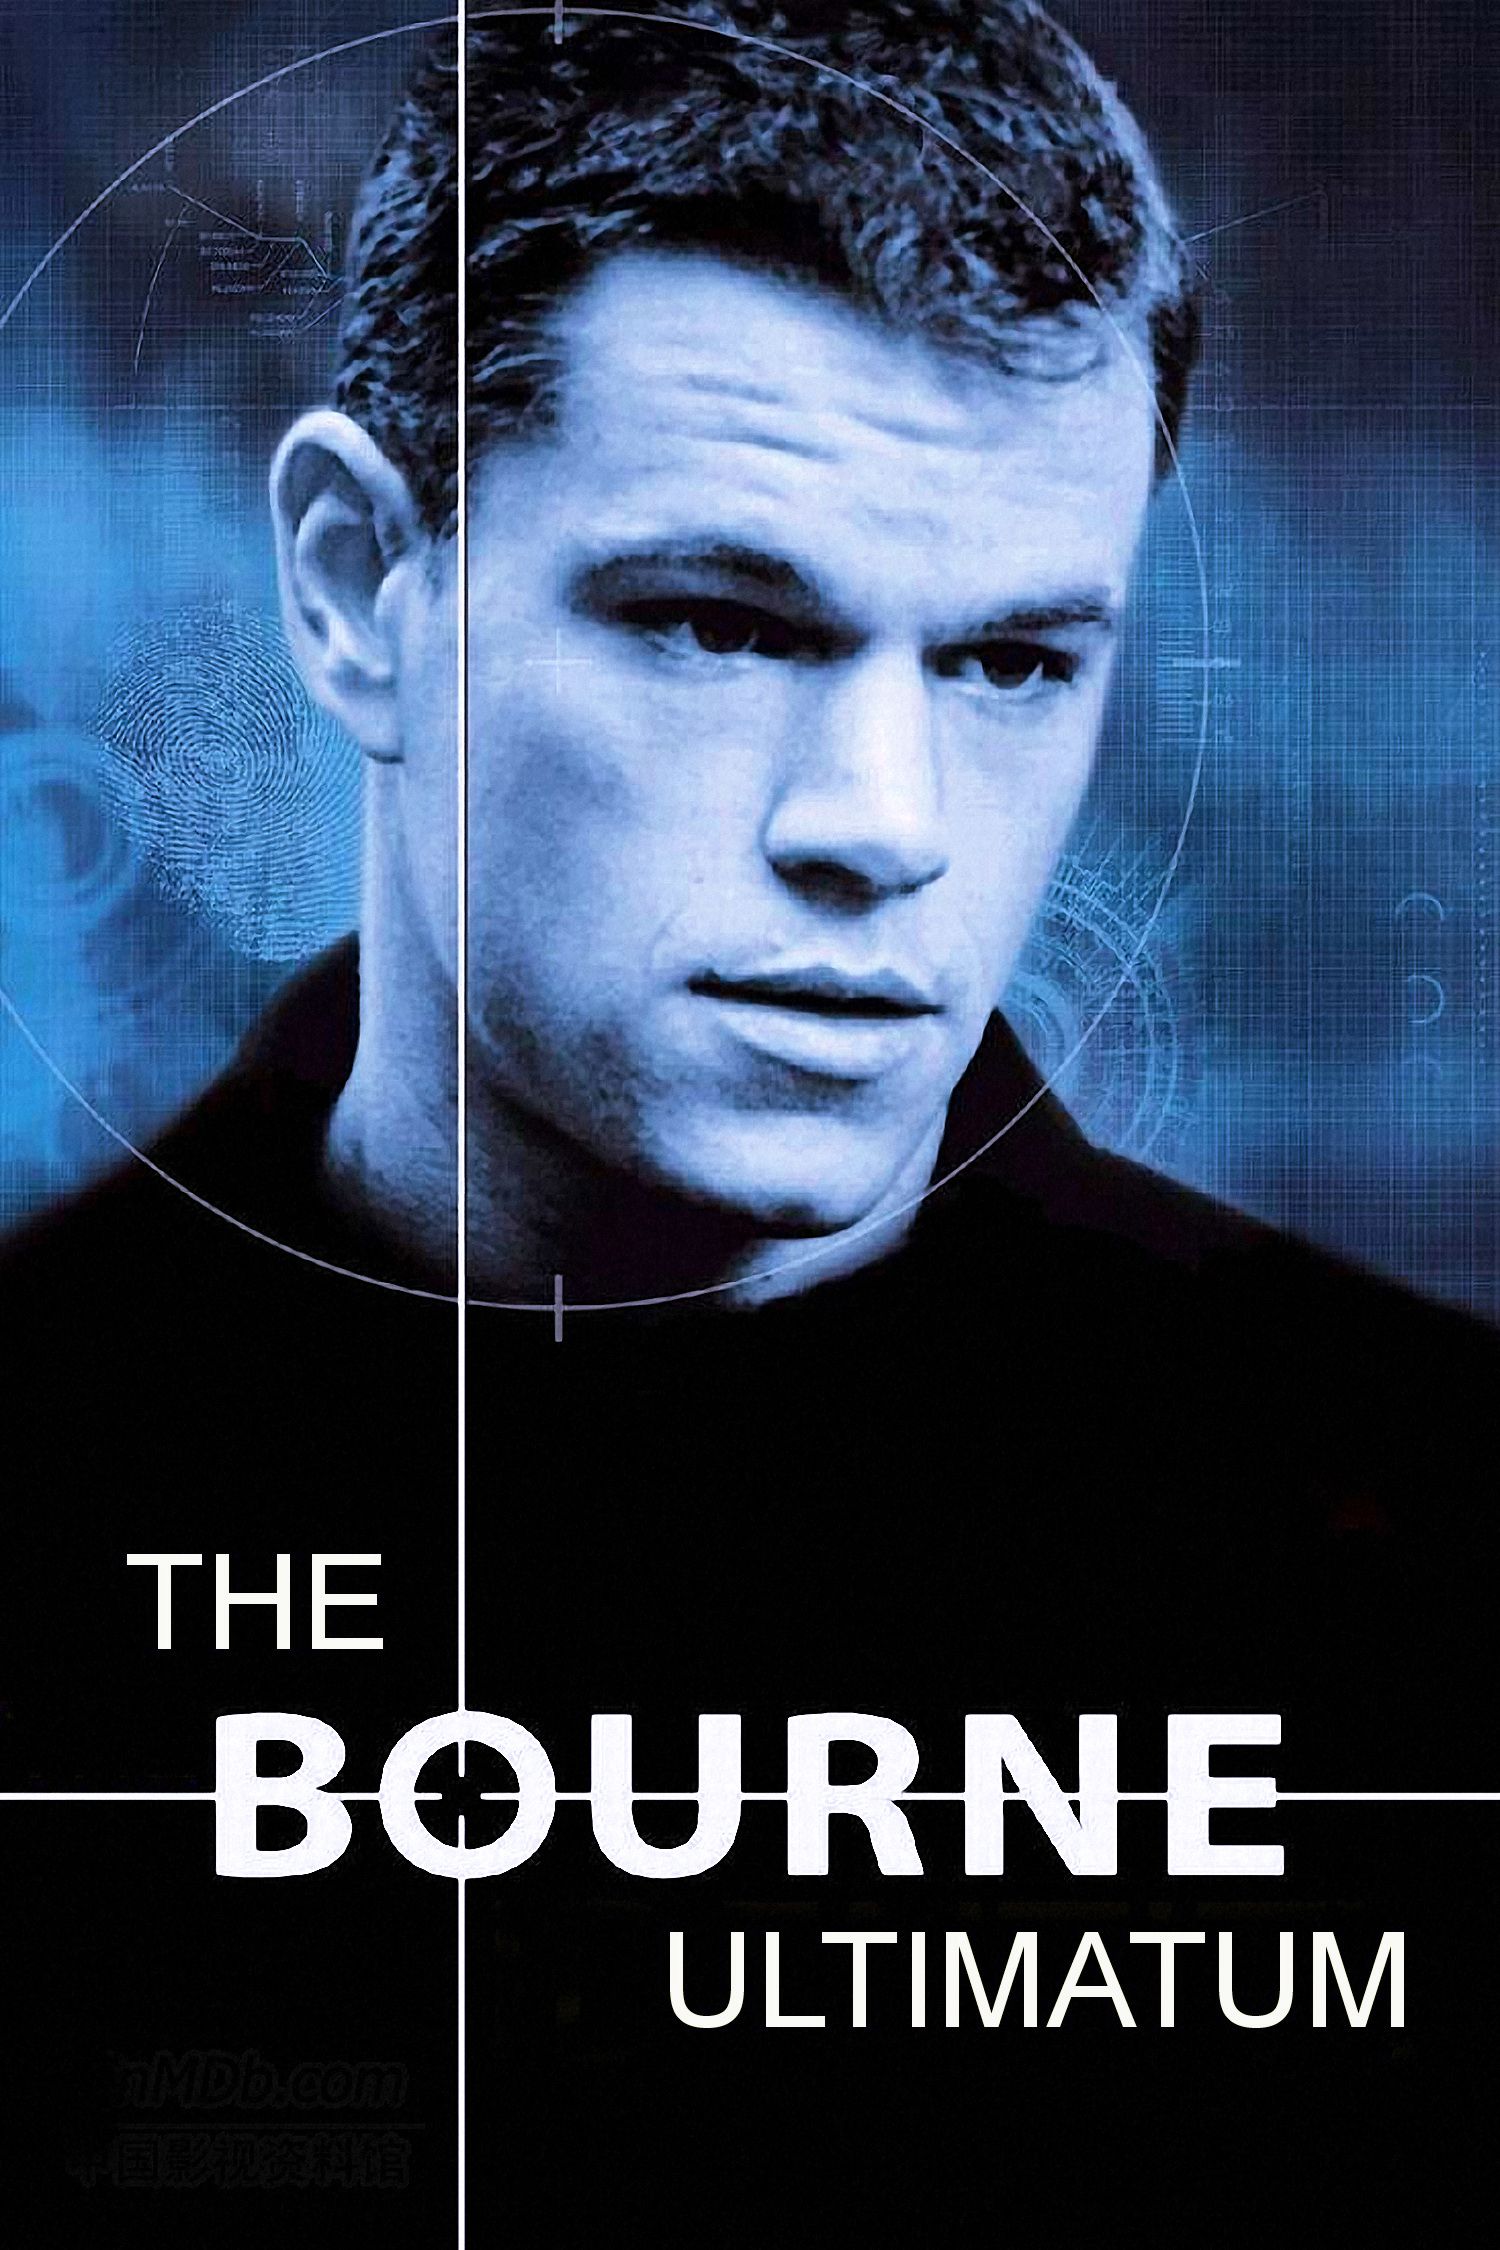 The Bourne Identity Wallpapers